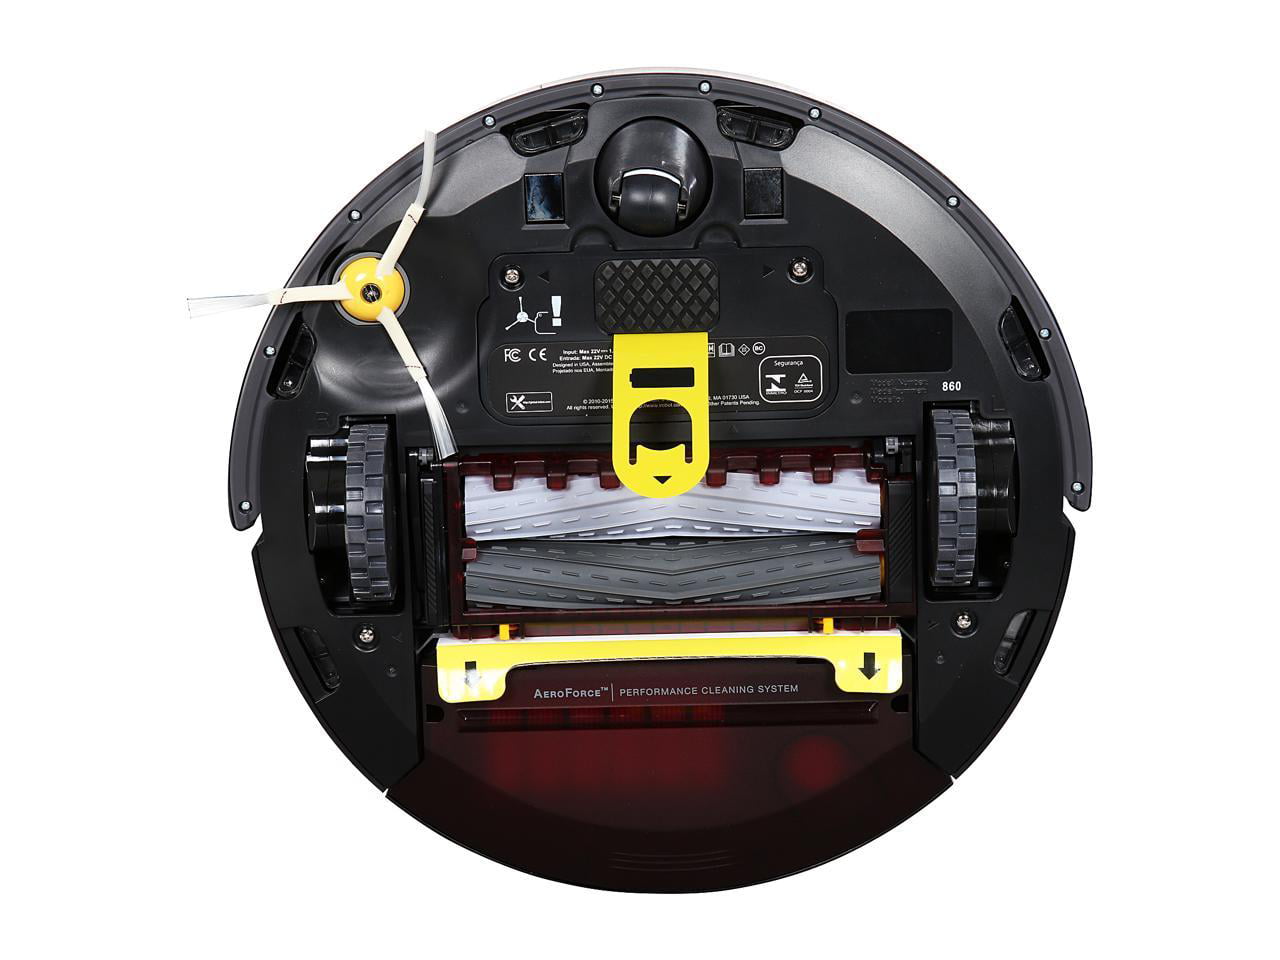 iRobot Roomba 860 Vacuum Cleaning with AeroForce Performance Cleaning System - Walmart.com